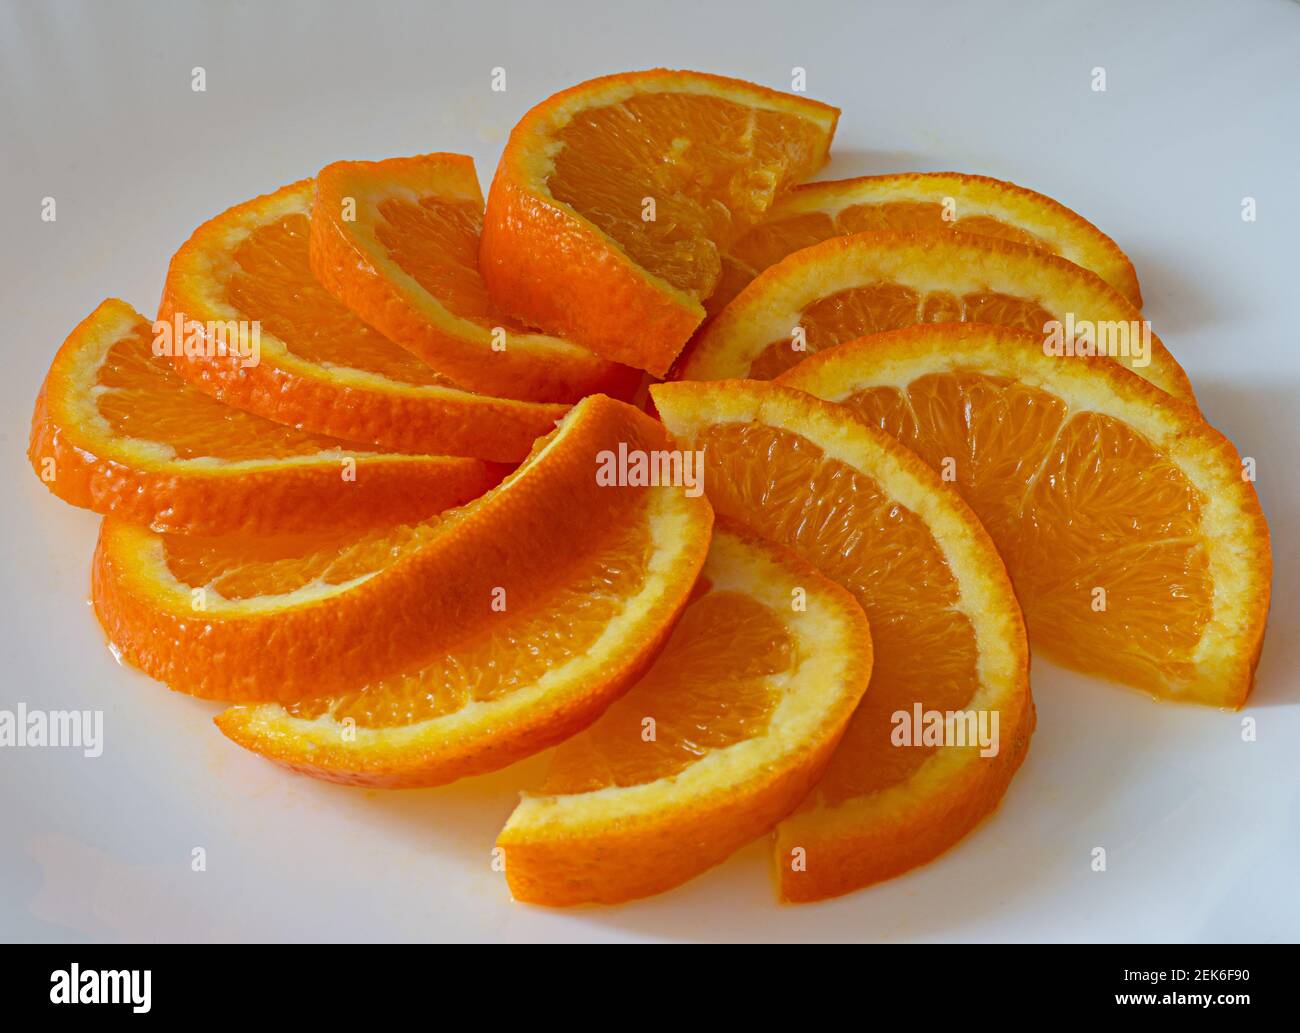 close up of fresh oranges slices on a plate Stock Photo